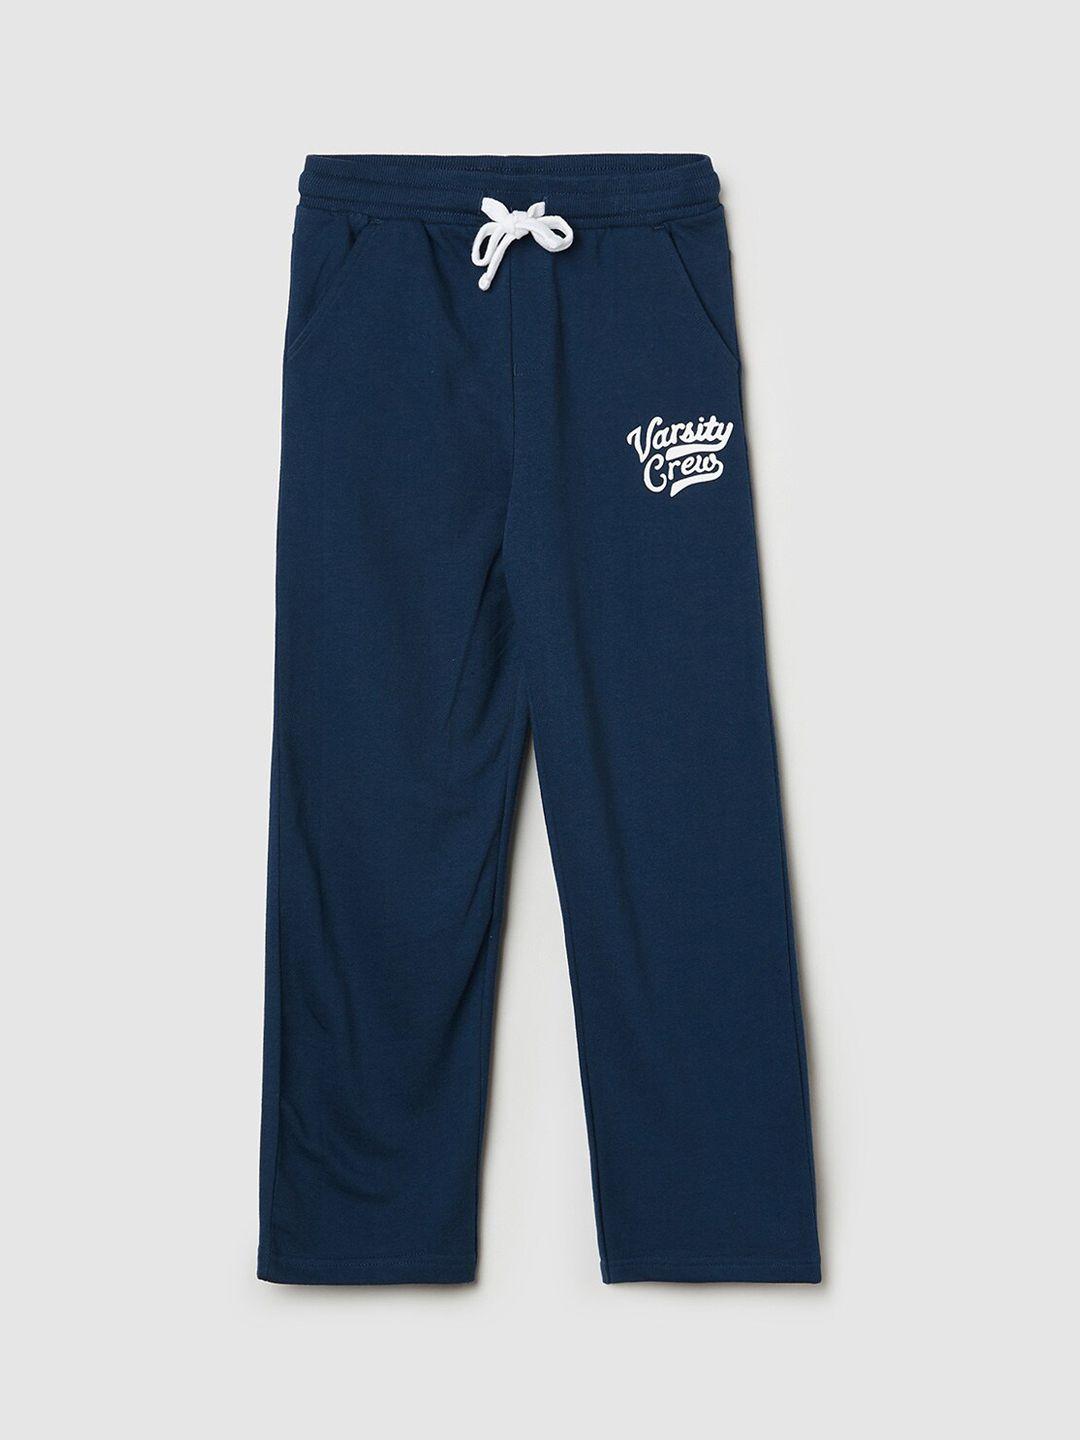 max Boys Navy Blue Solid Pure Cotton Track Pants